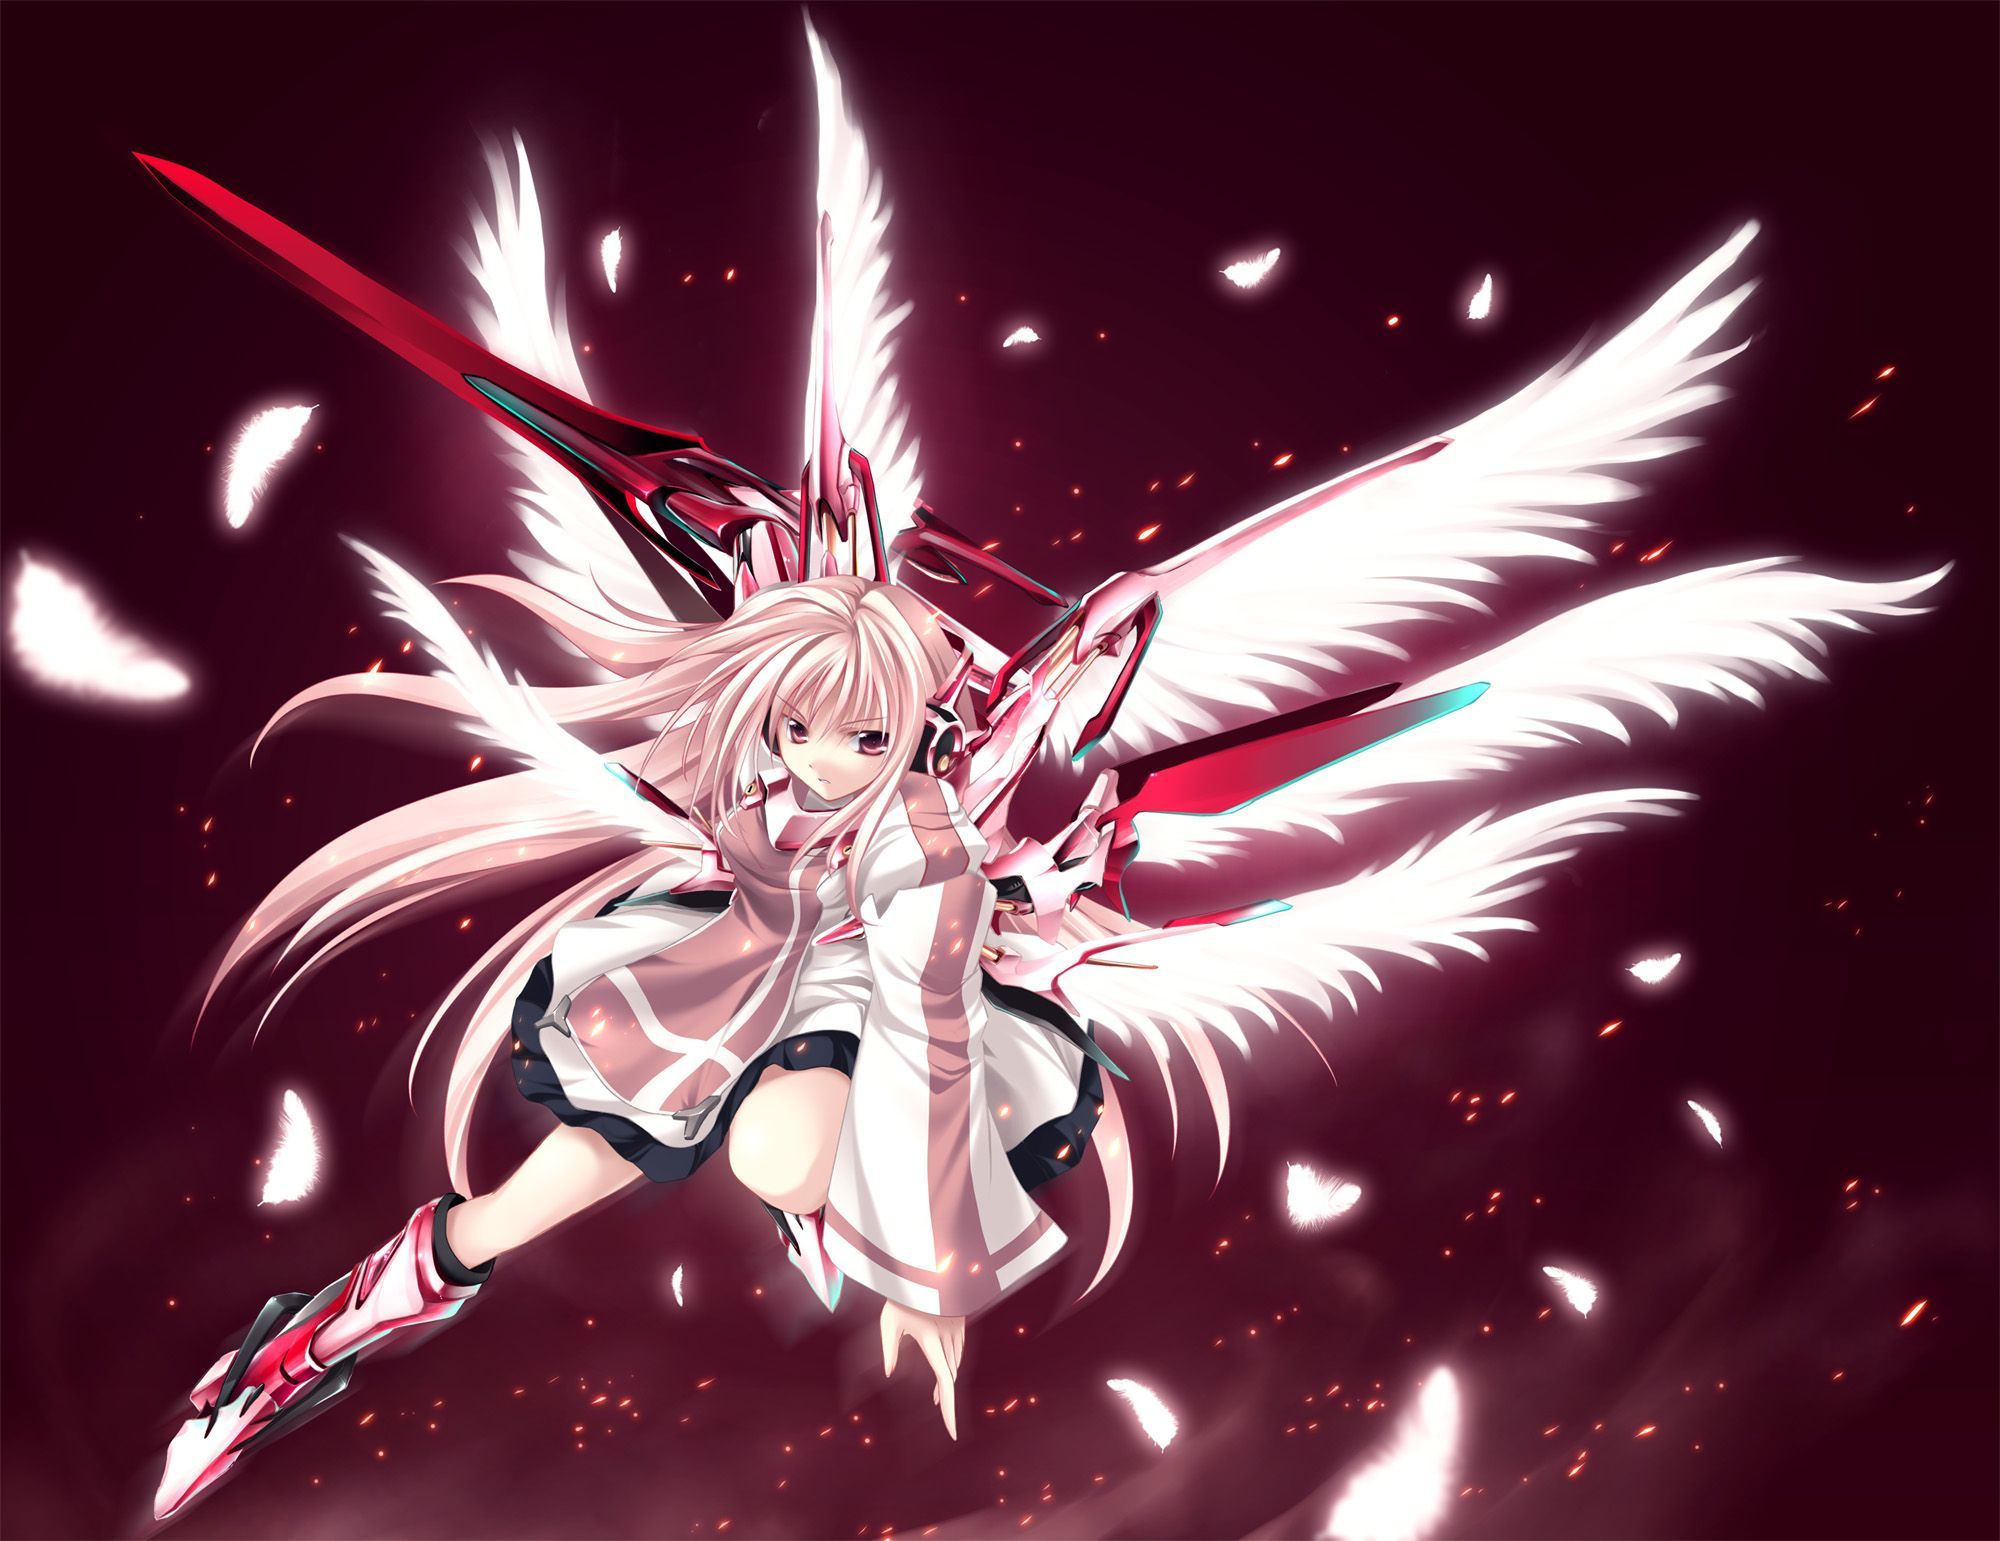 Anime Angel wings Wallpapers, Backgrounds, Images, Art Photos